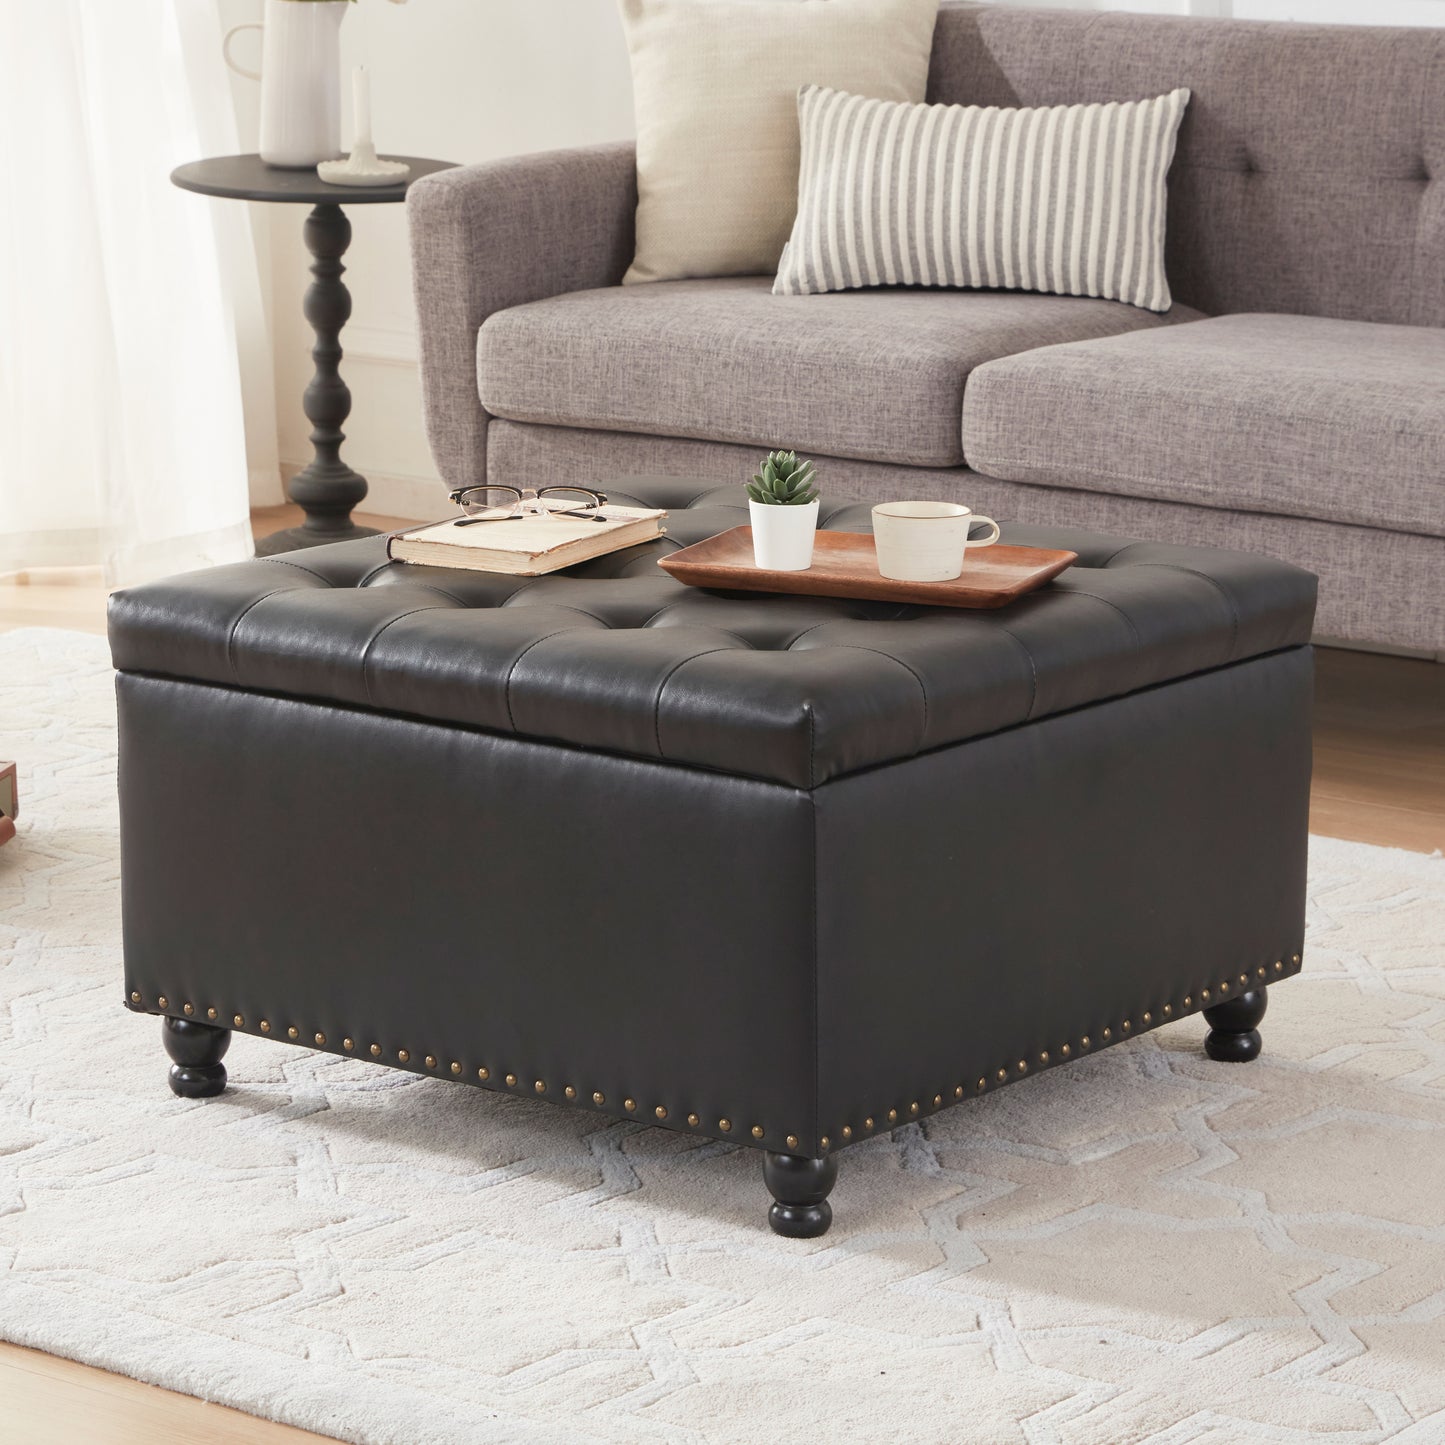 Large Square Storage Ottoman Bench, Tufted Coffee Table Ottoman with Storage, Oversized Storage Ottomans Toy Box Footrest for Living Room, Black